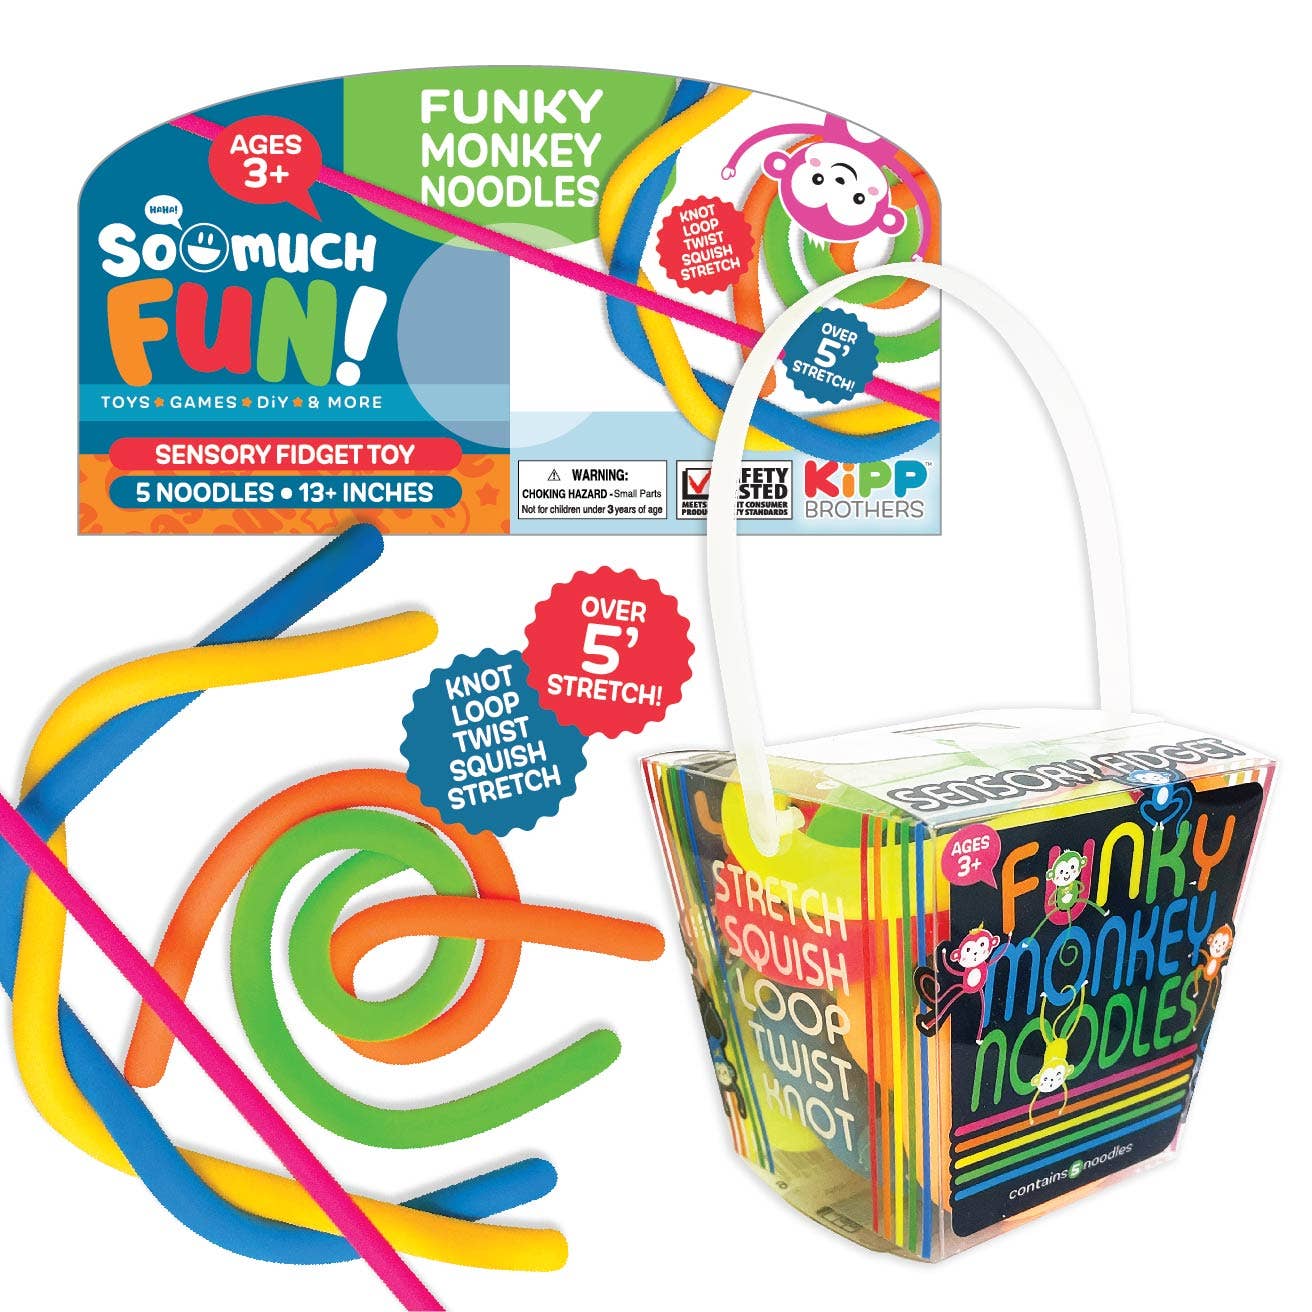 SO MUCH FUN! FUNKY MONKEY NOODLES 12 PIECES PER PACK